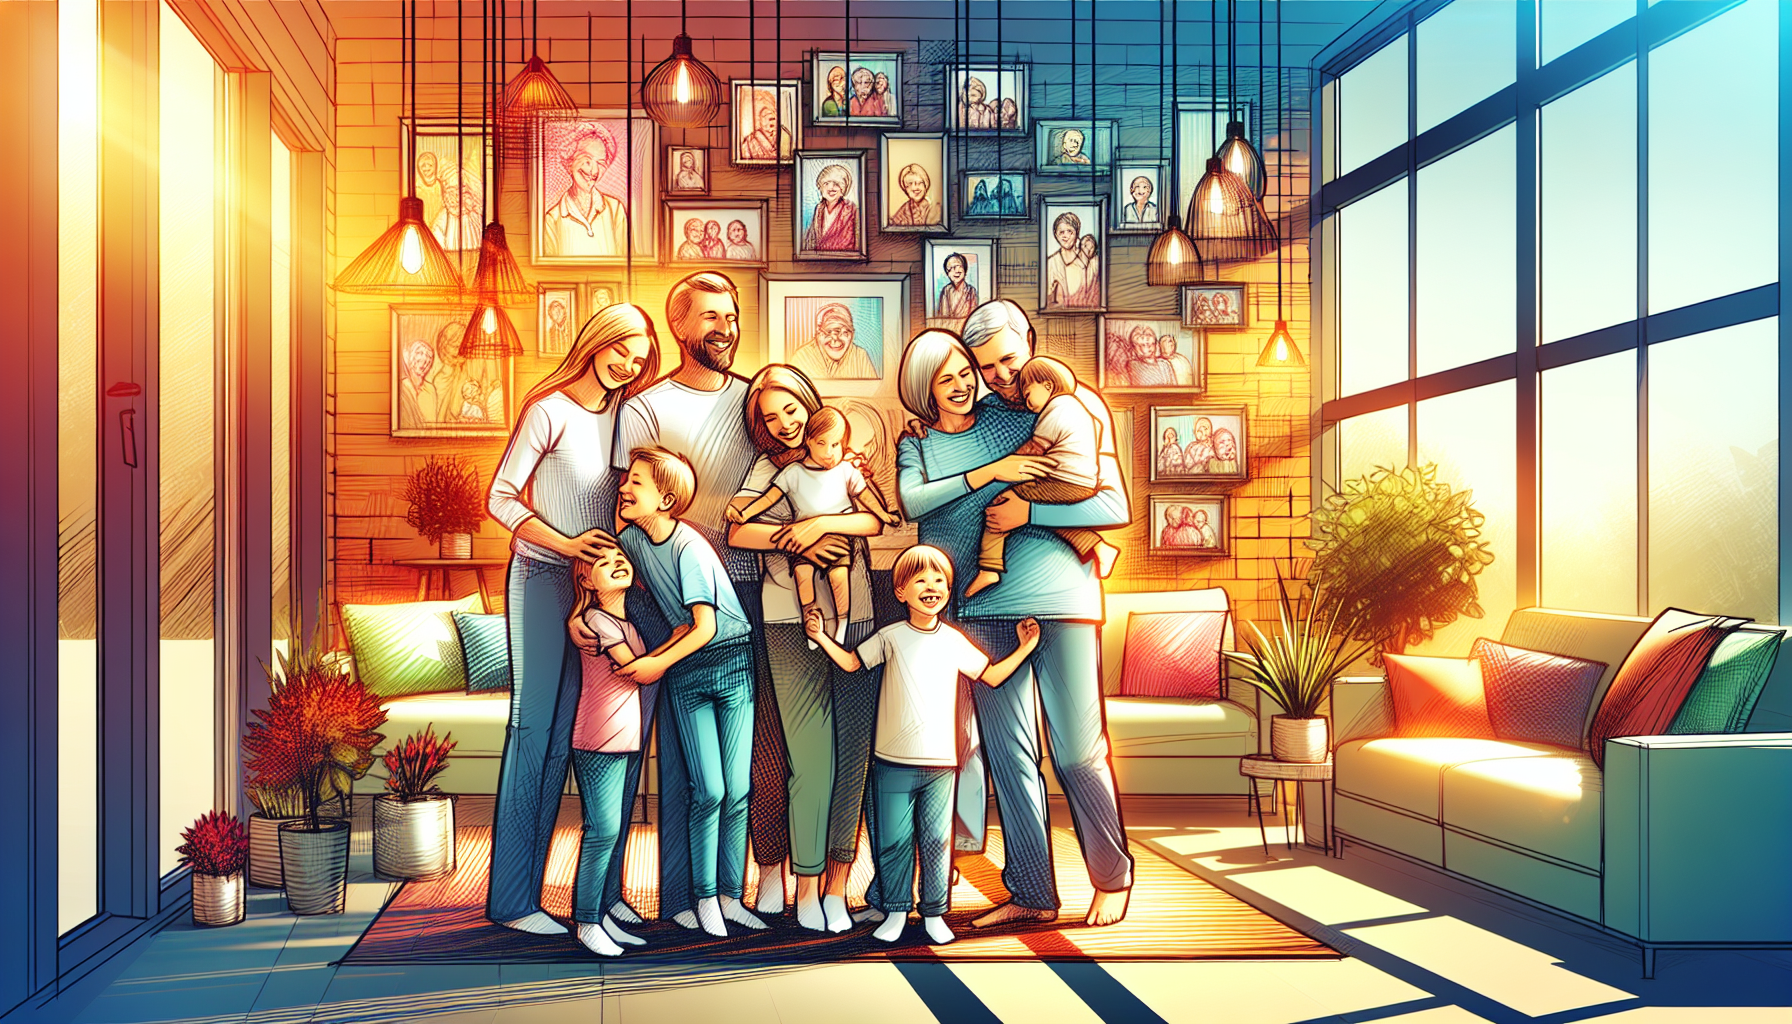 A joyful family of diverse ages gathered in a cozy living room, their faces radiating contentment and love. Sunlight streams in through the large windows, illuminating their warm embrace and the cheri